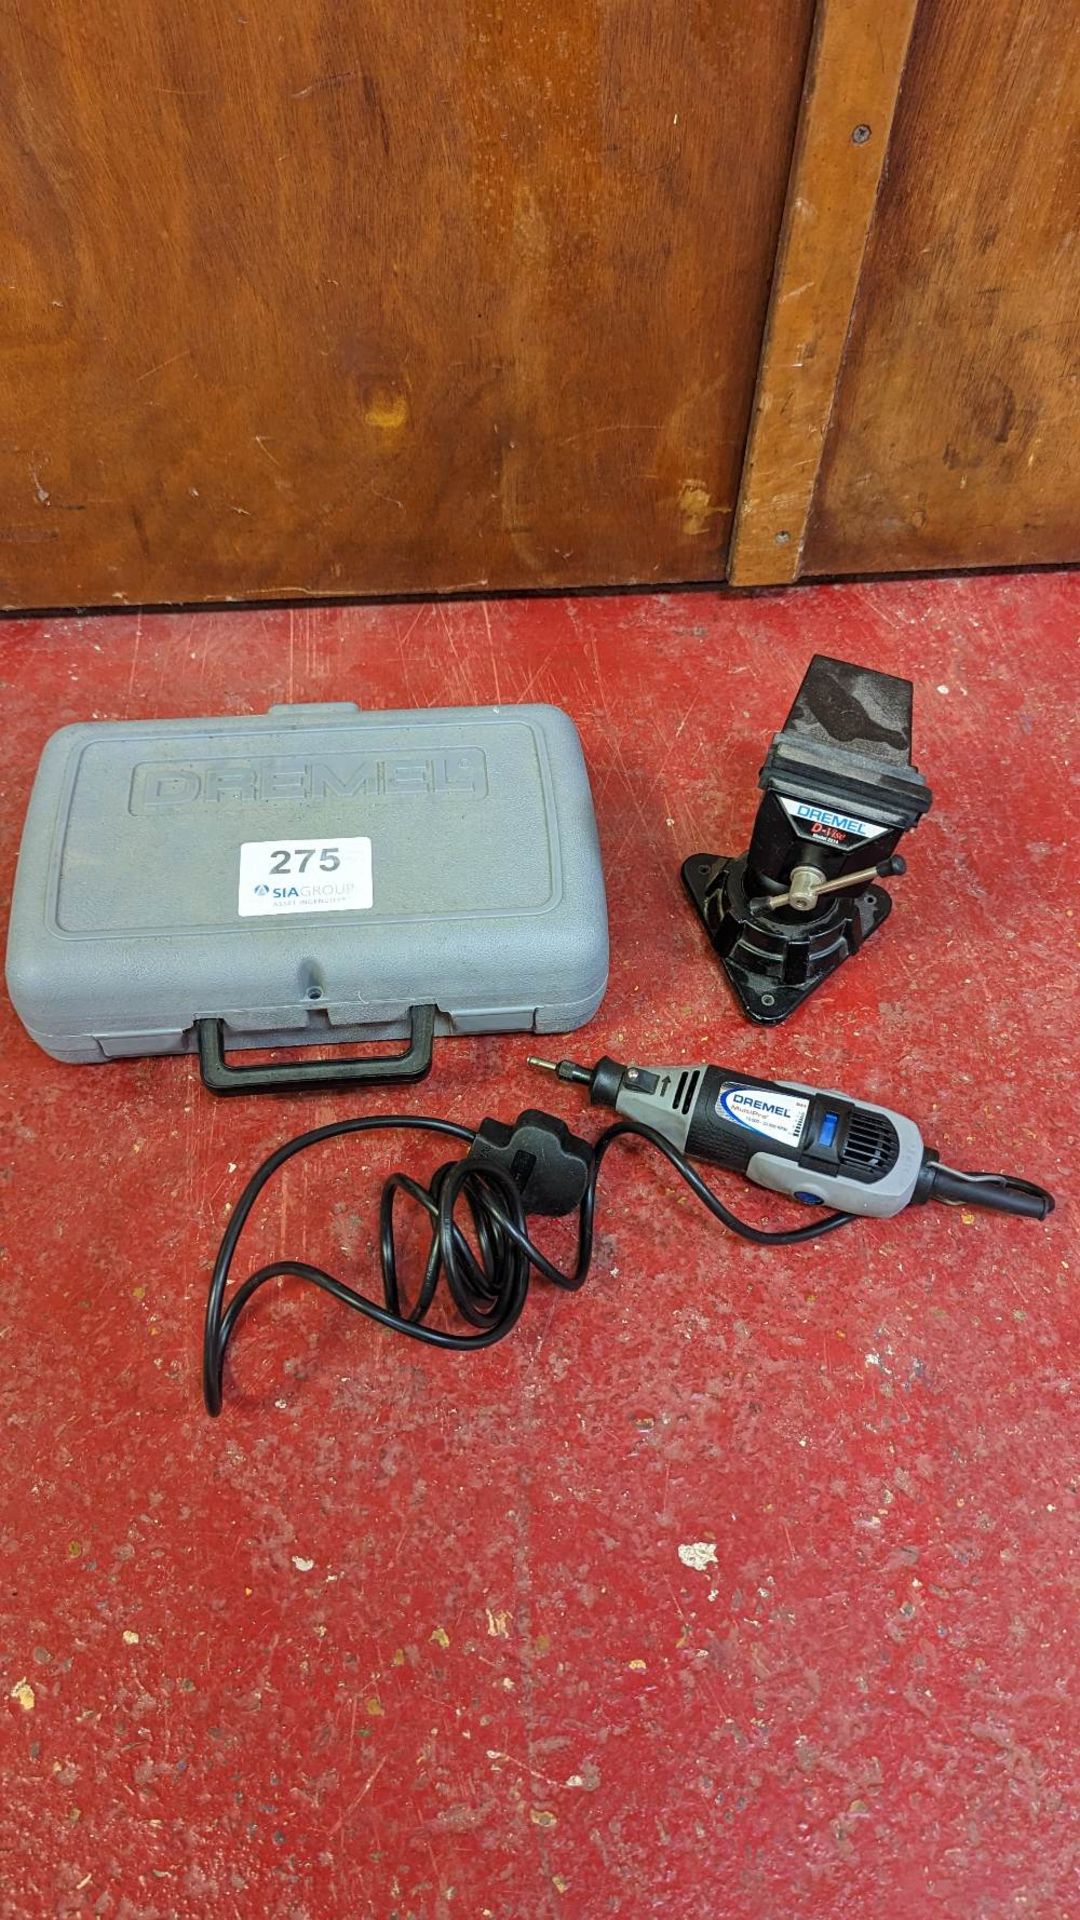 Dremel Miltipro with Dremel D-vise 2214 and carry case